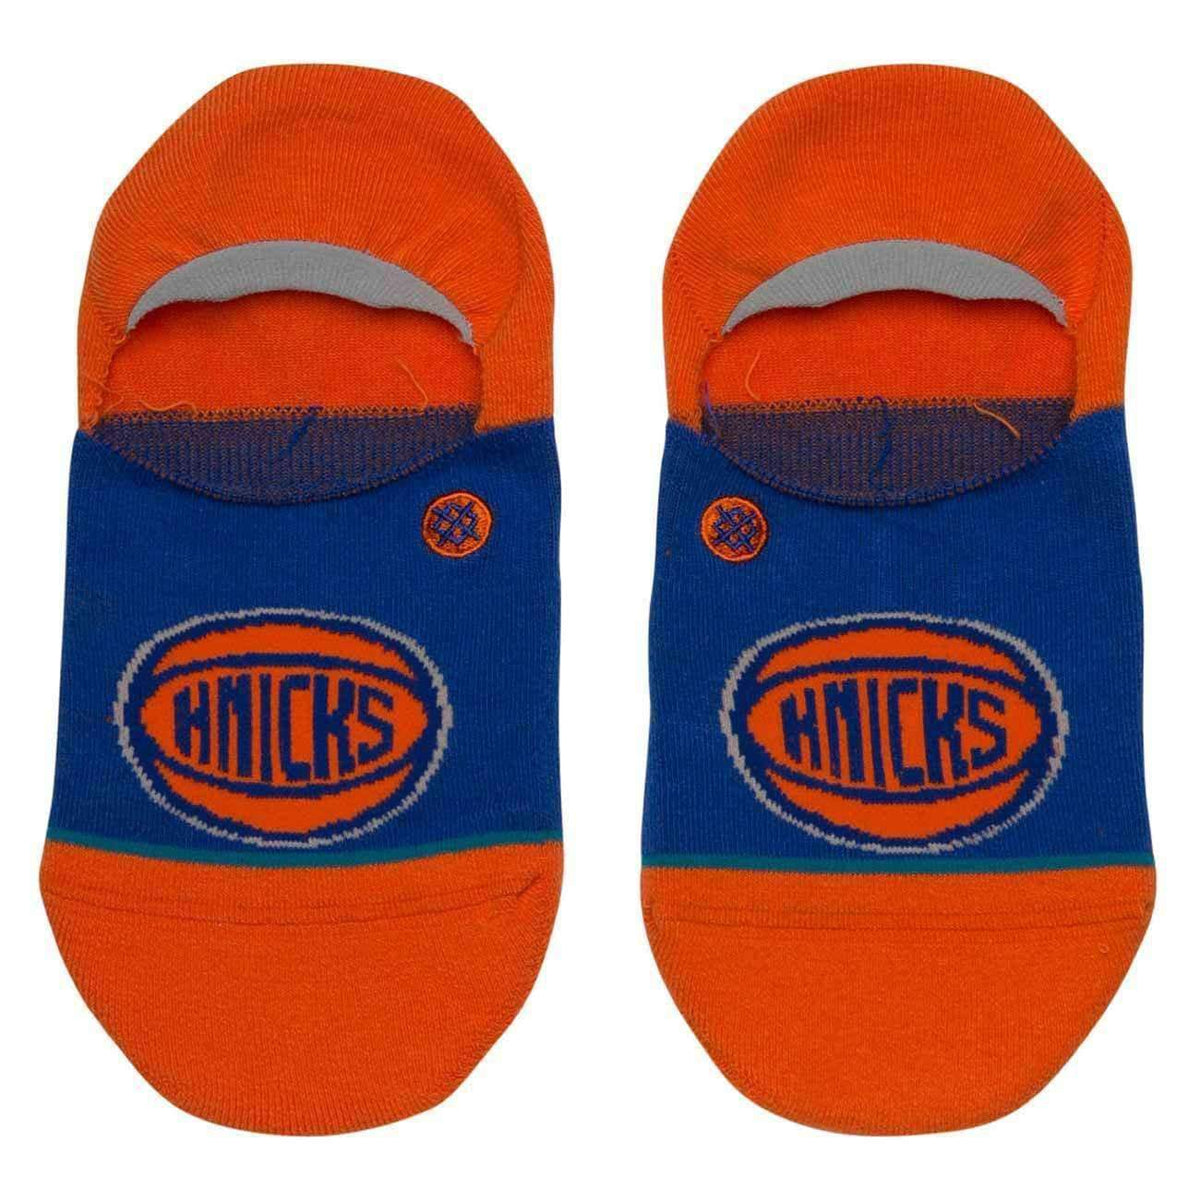 Stance NBA Knicks Invisible Low Socks in Blue Mens Low/Ankle Socks by Stance